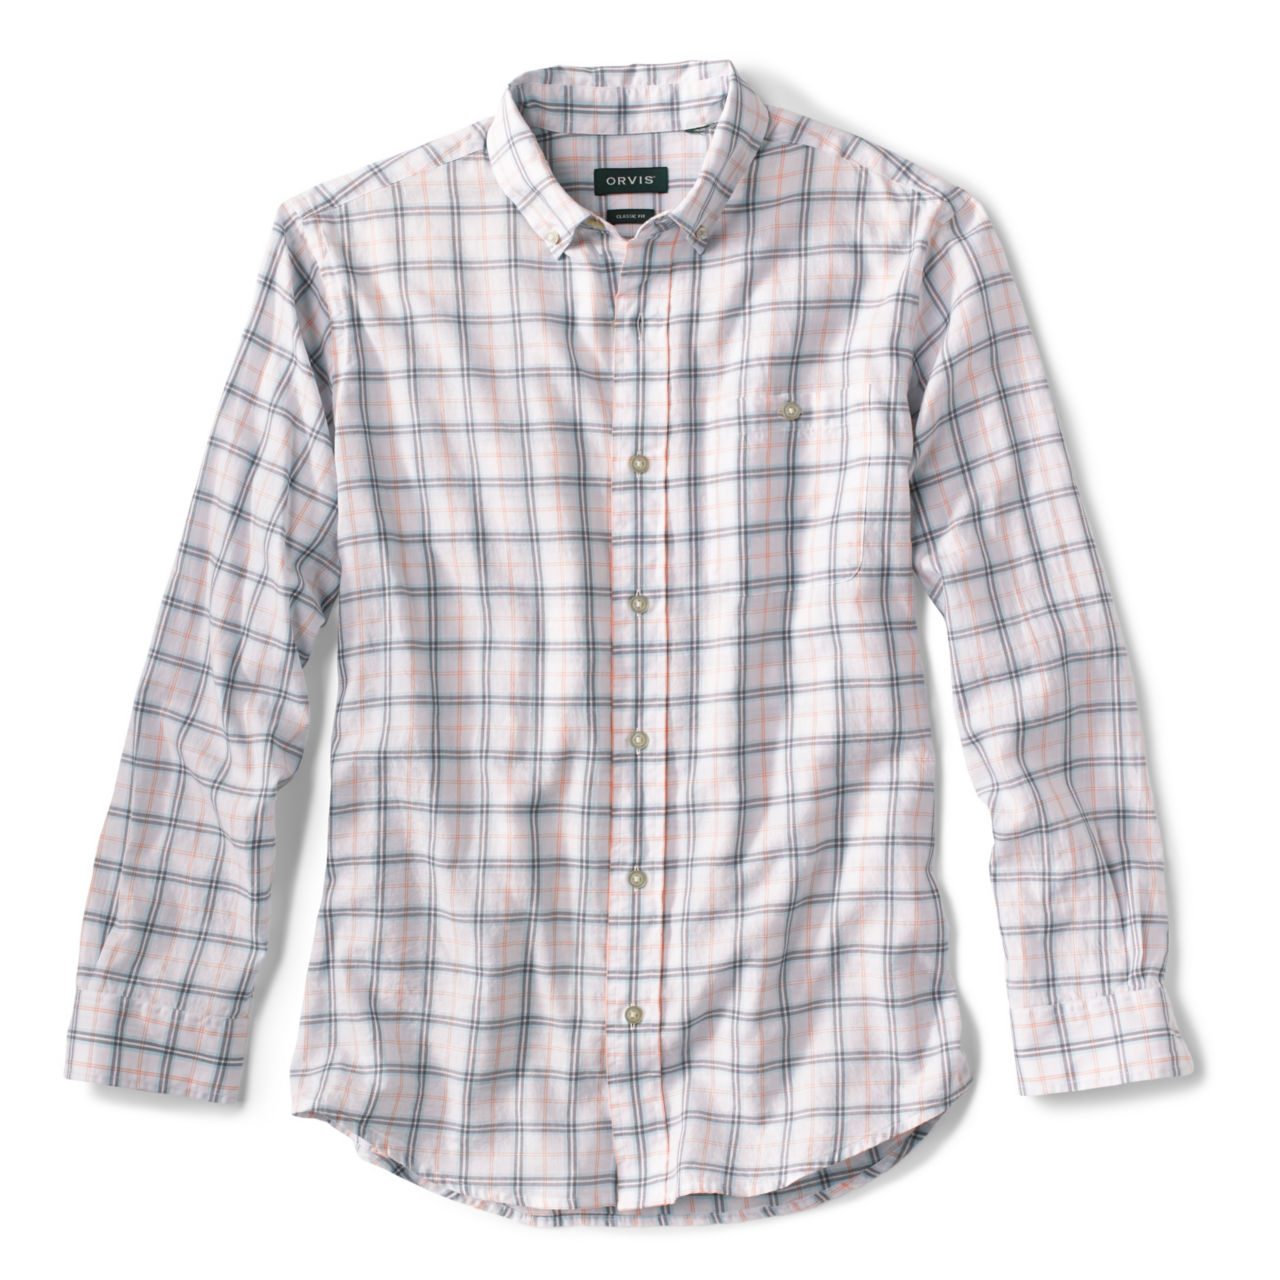 Featherweight Long-Sleeved Shirt -  image number 0